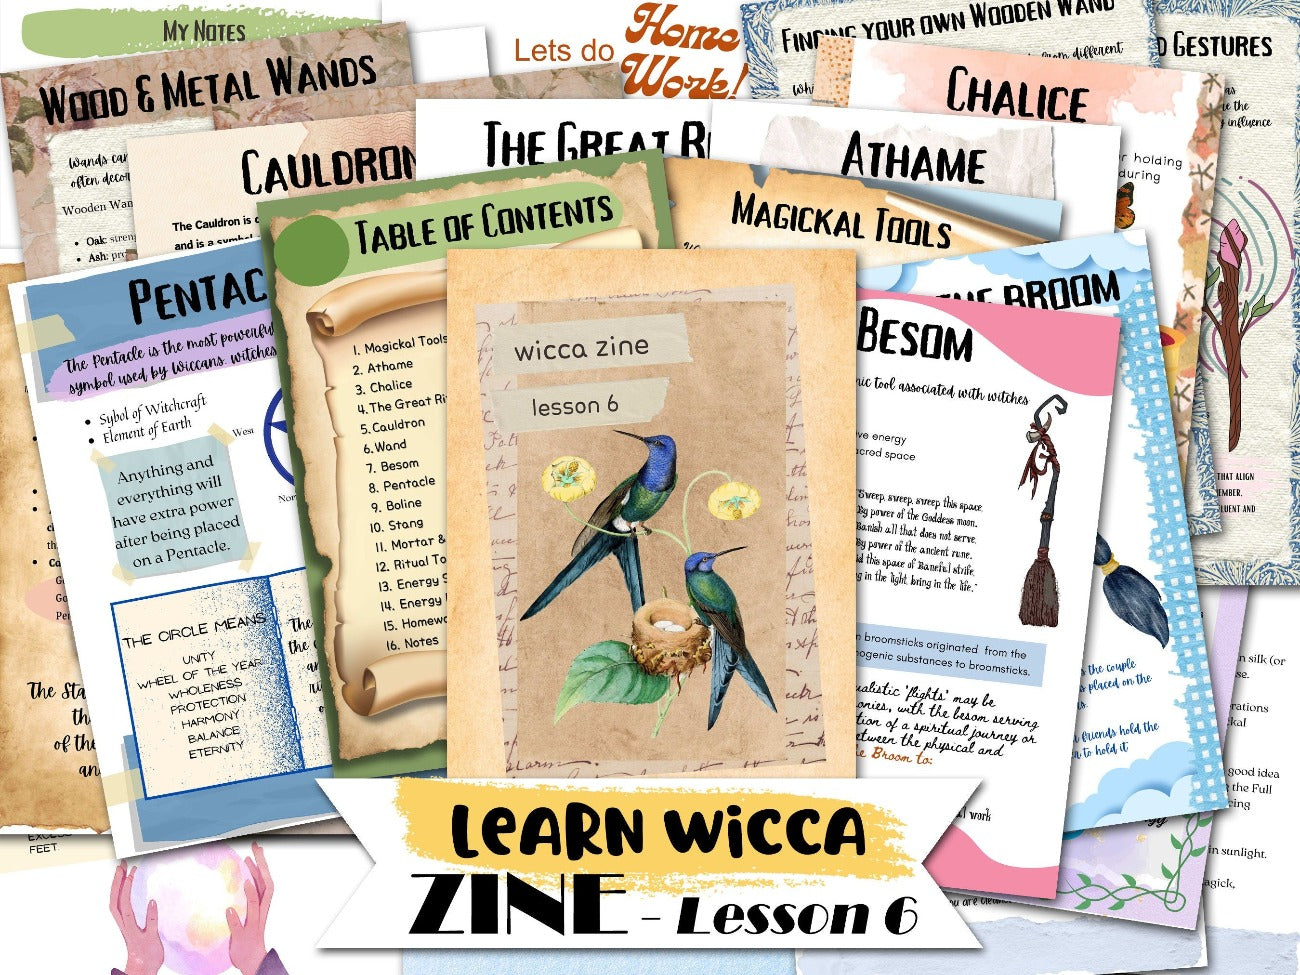 WICCA ZINE Lesson 6 - Learn Wicca, Unlocking the Power of The Altar, create bless and empower sacred space, Printable Witchcraft Course - Morgana Magick Spell